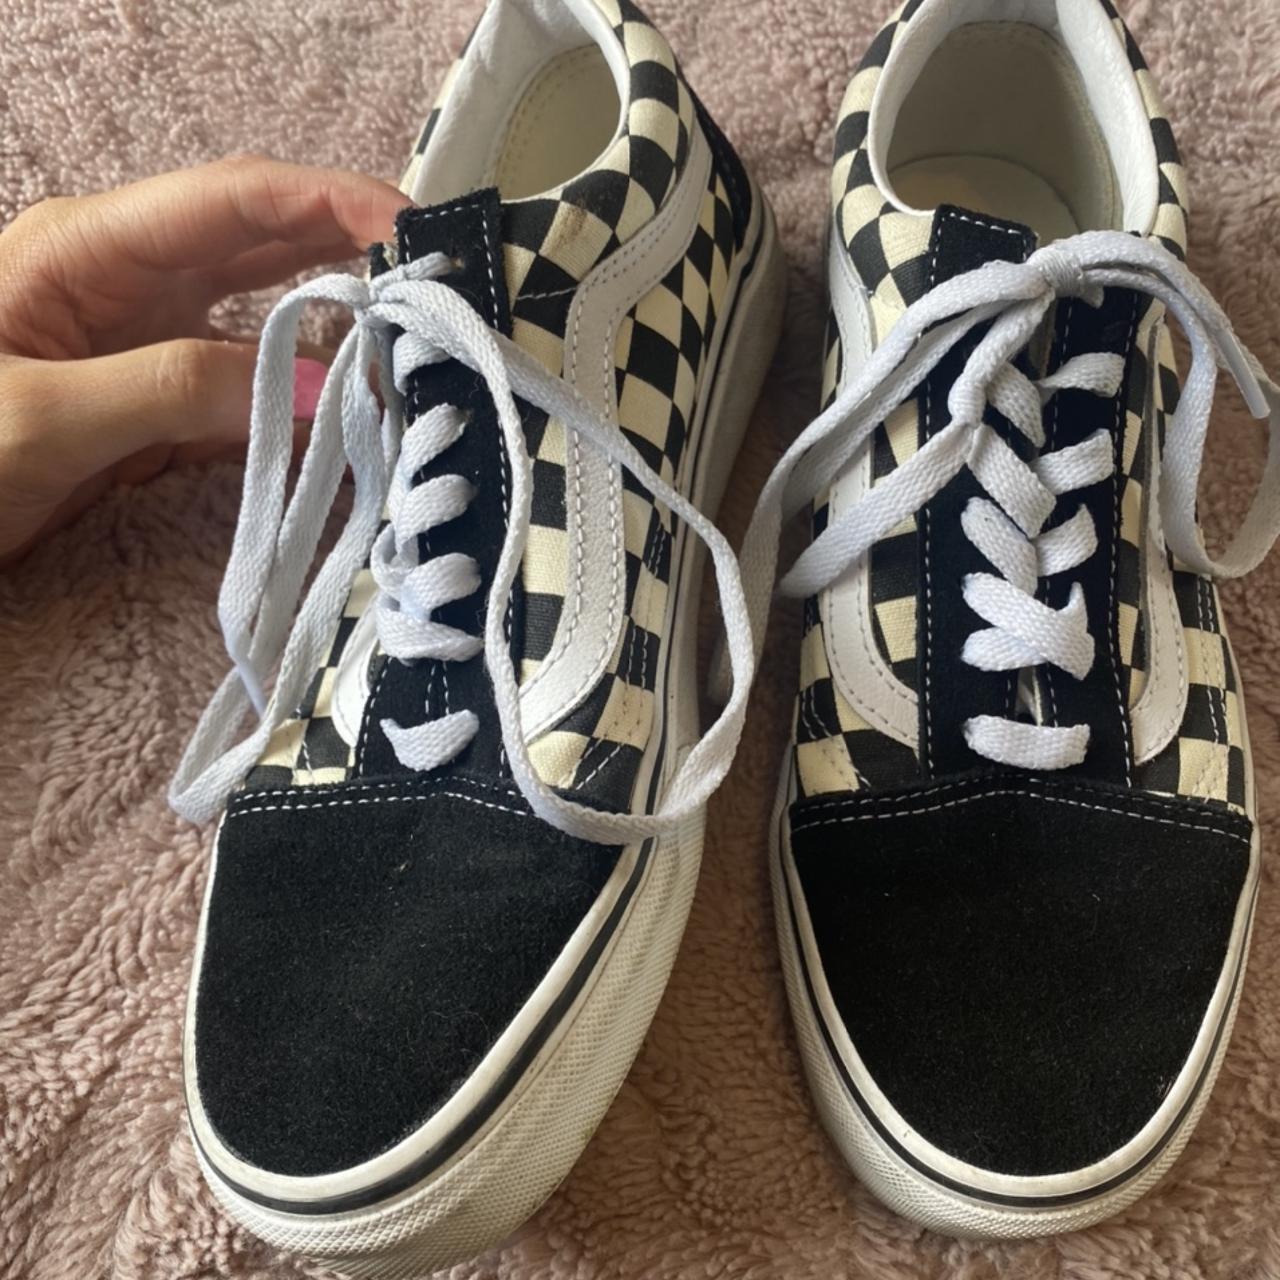 Product Image 2 - Checkered Vans 

Literally worn a